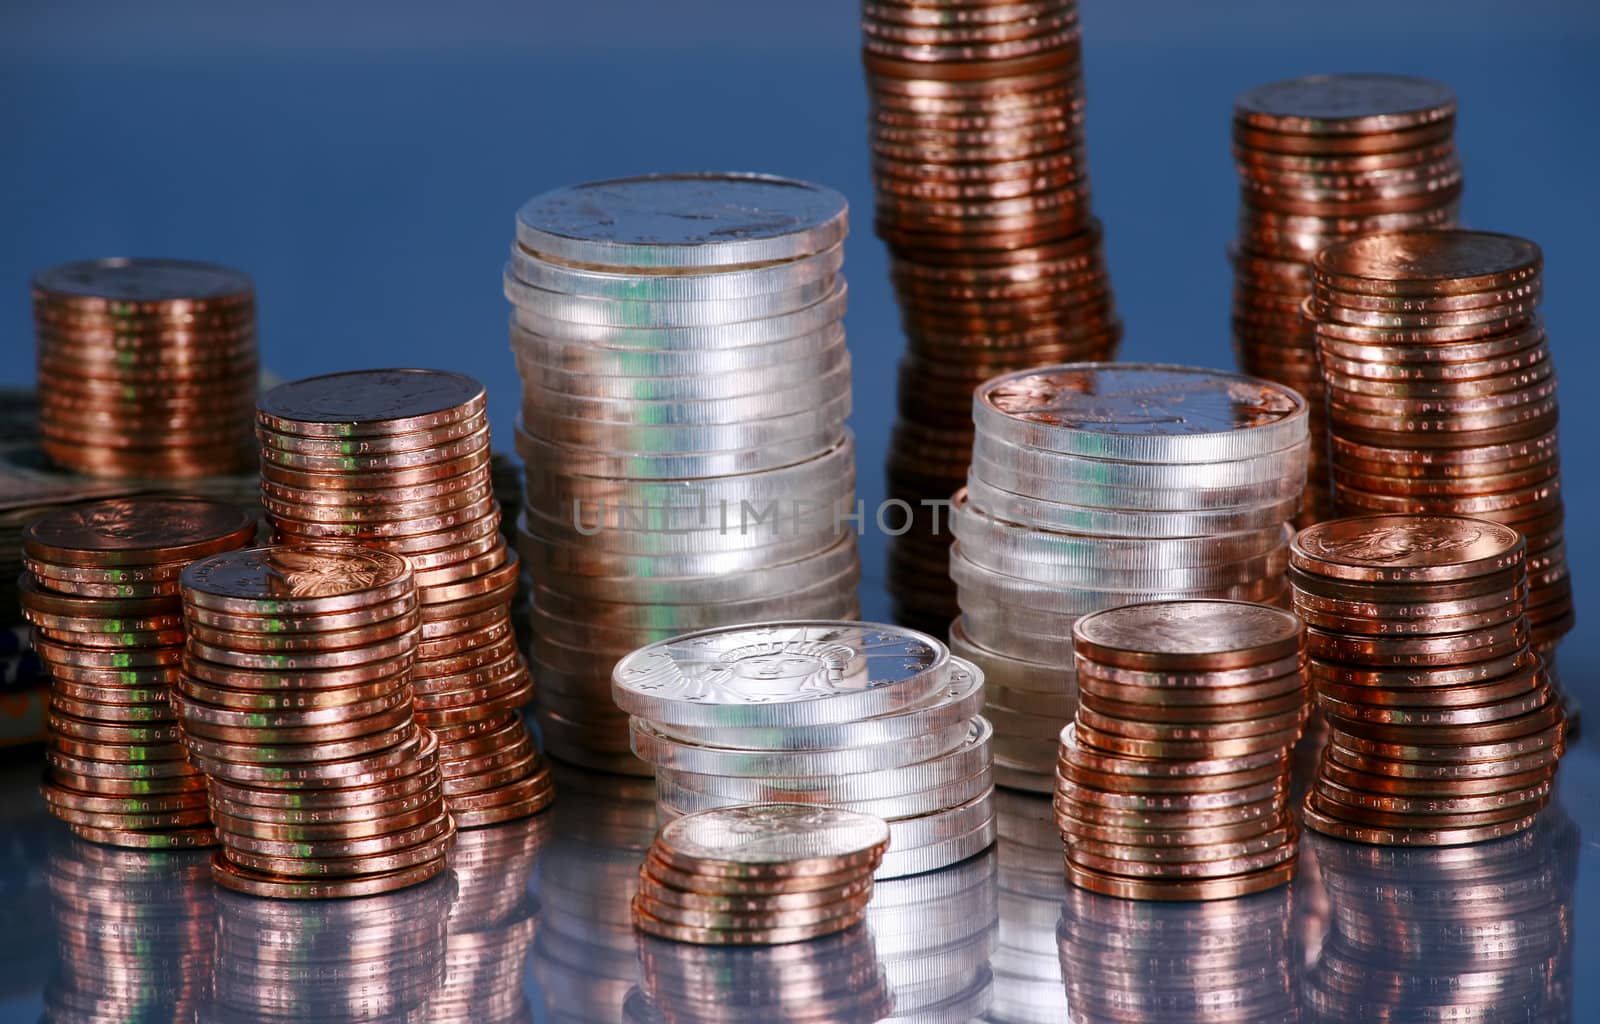 Stacks of silver and gold coins on black reflective surface